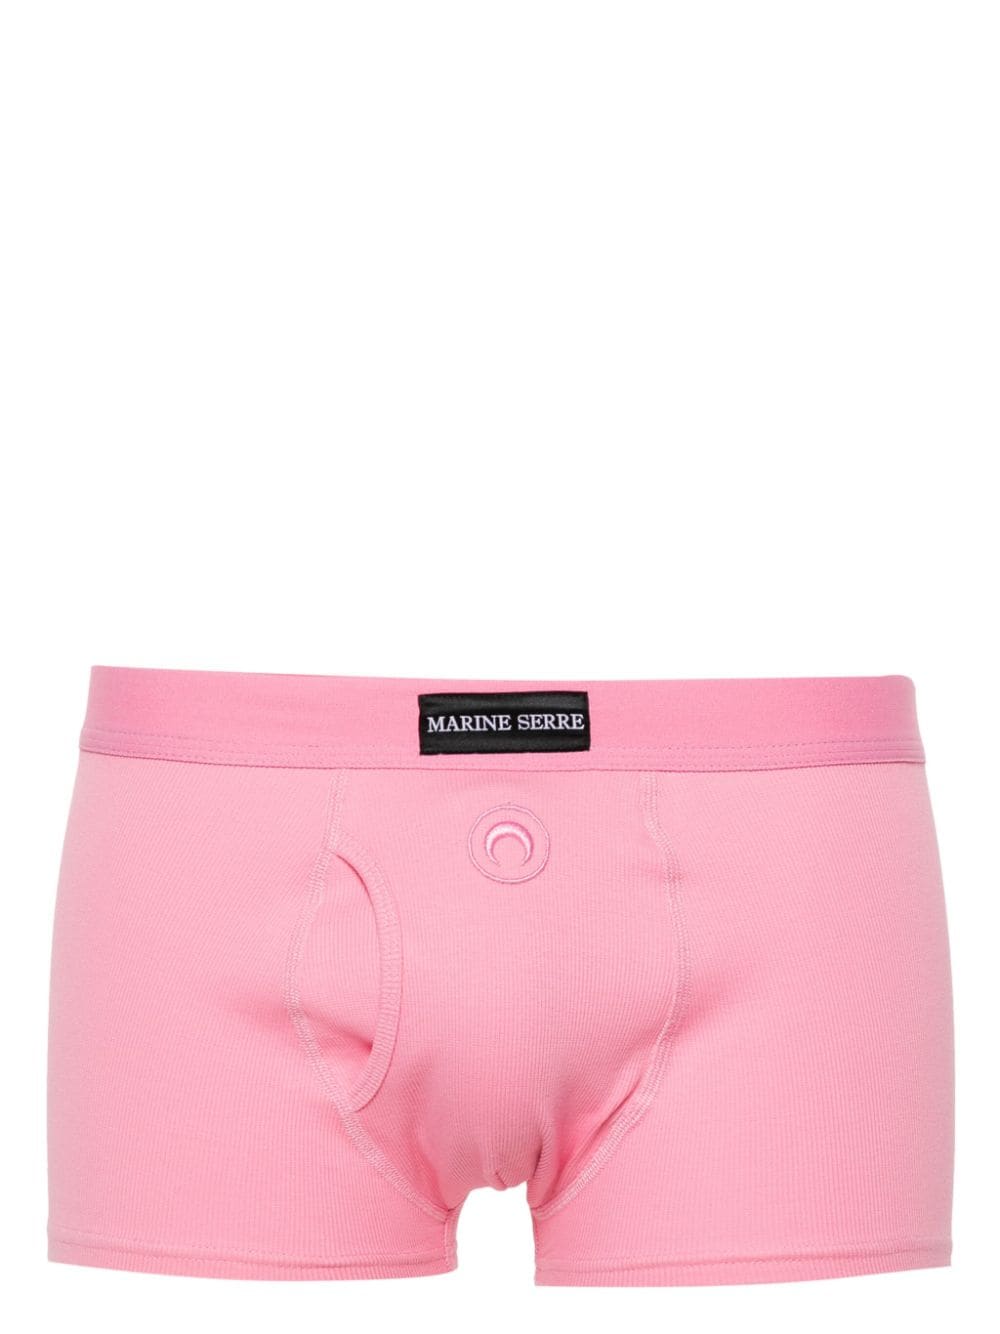 Marine Serre Crescent Moon-embroidered Boxers In Pink